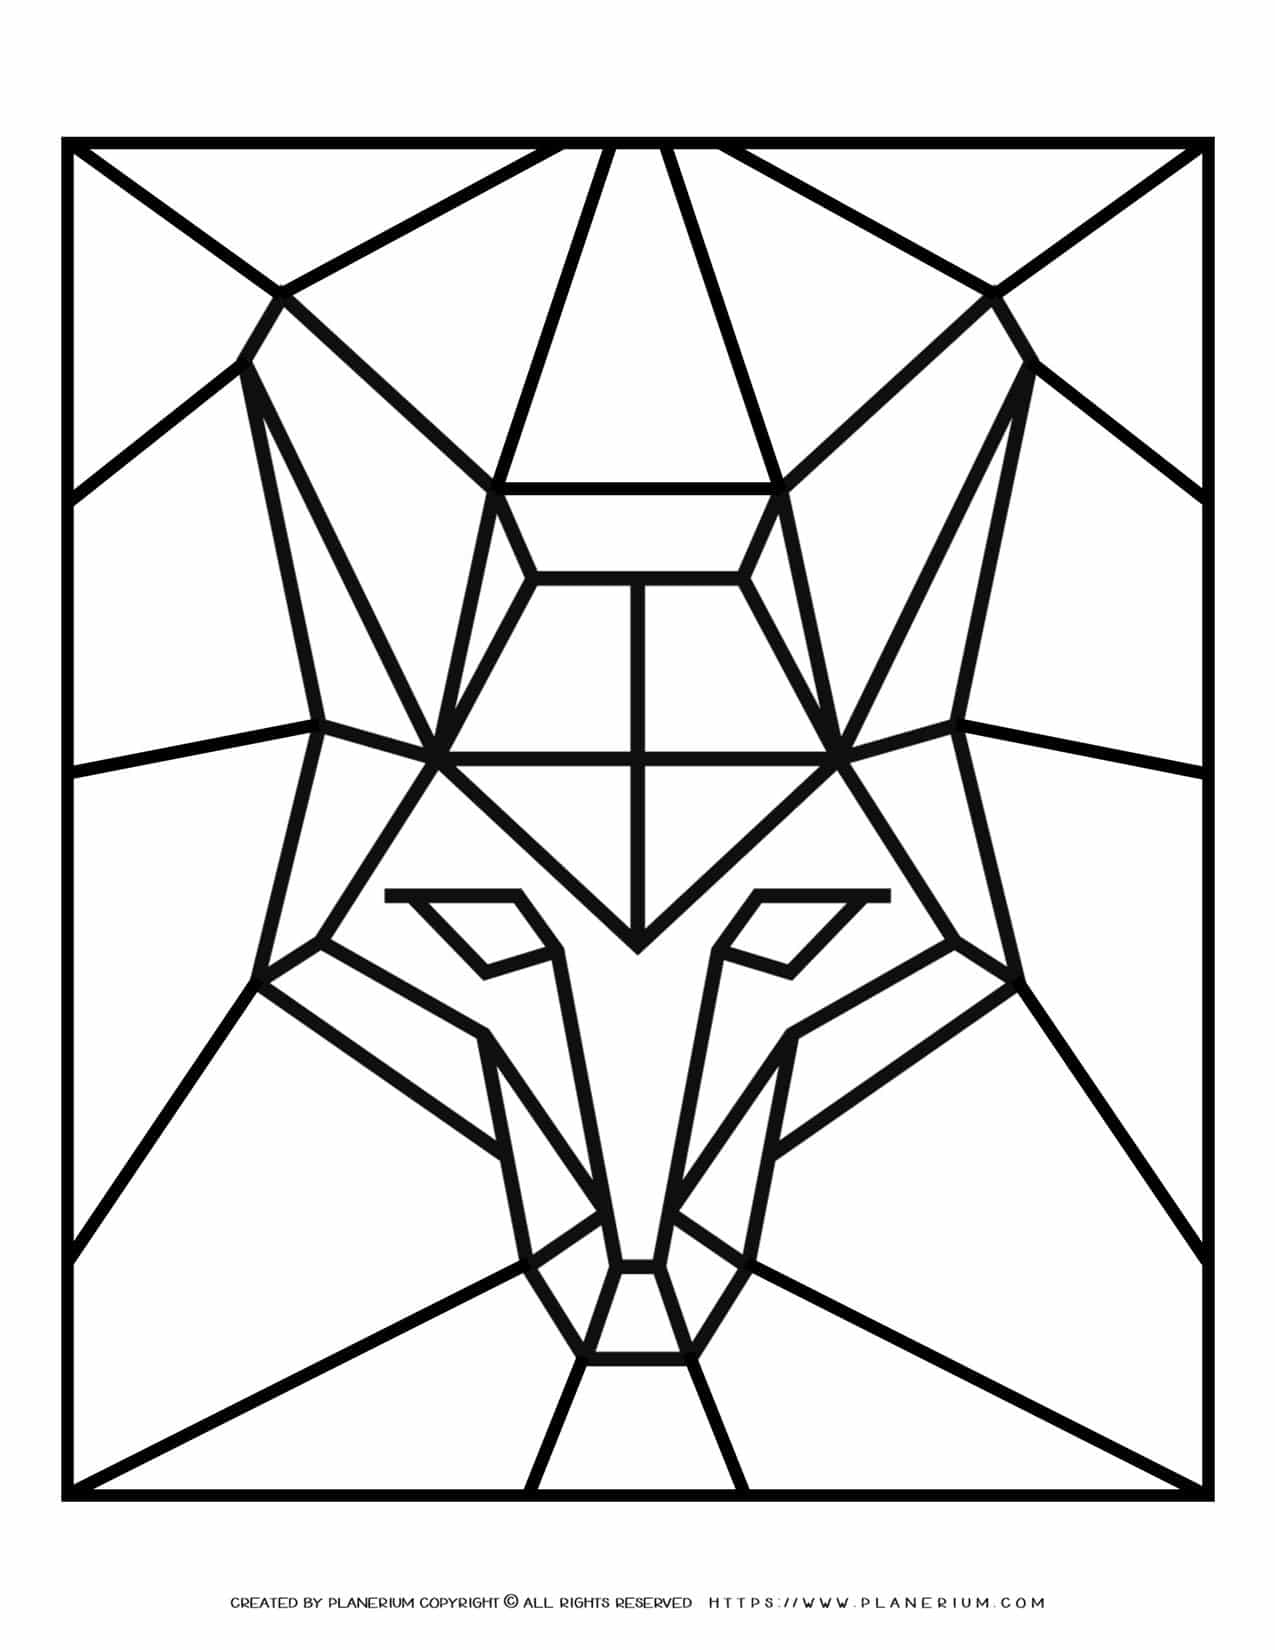 Adult Coloring Pages - Geometric Animals - Fox - Free Printable | Planerium